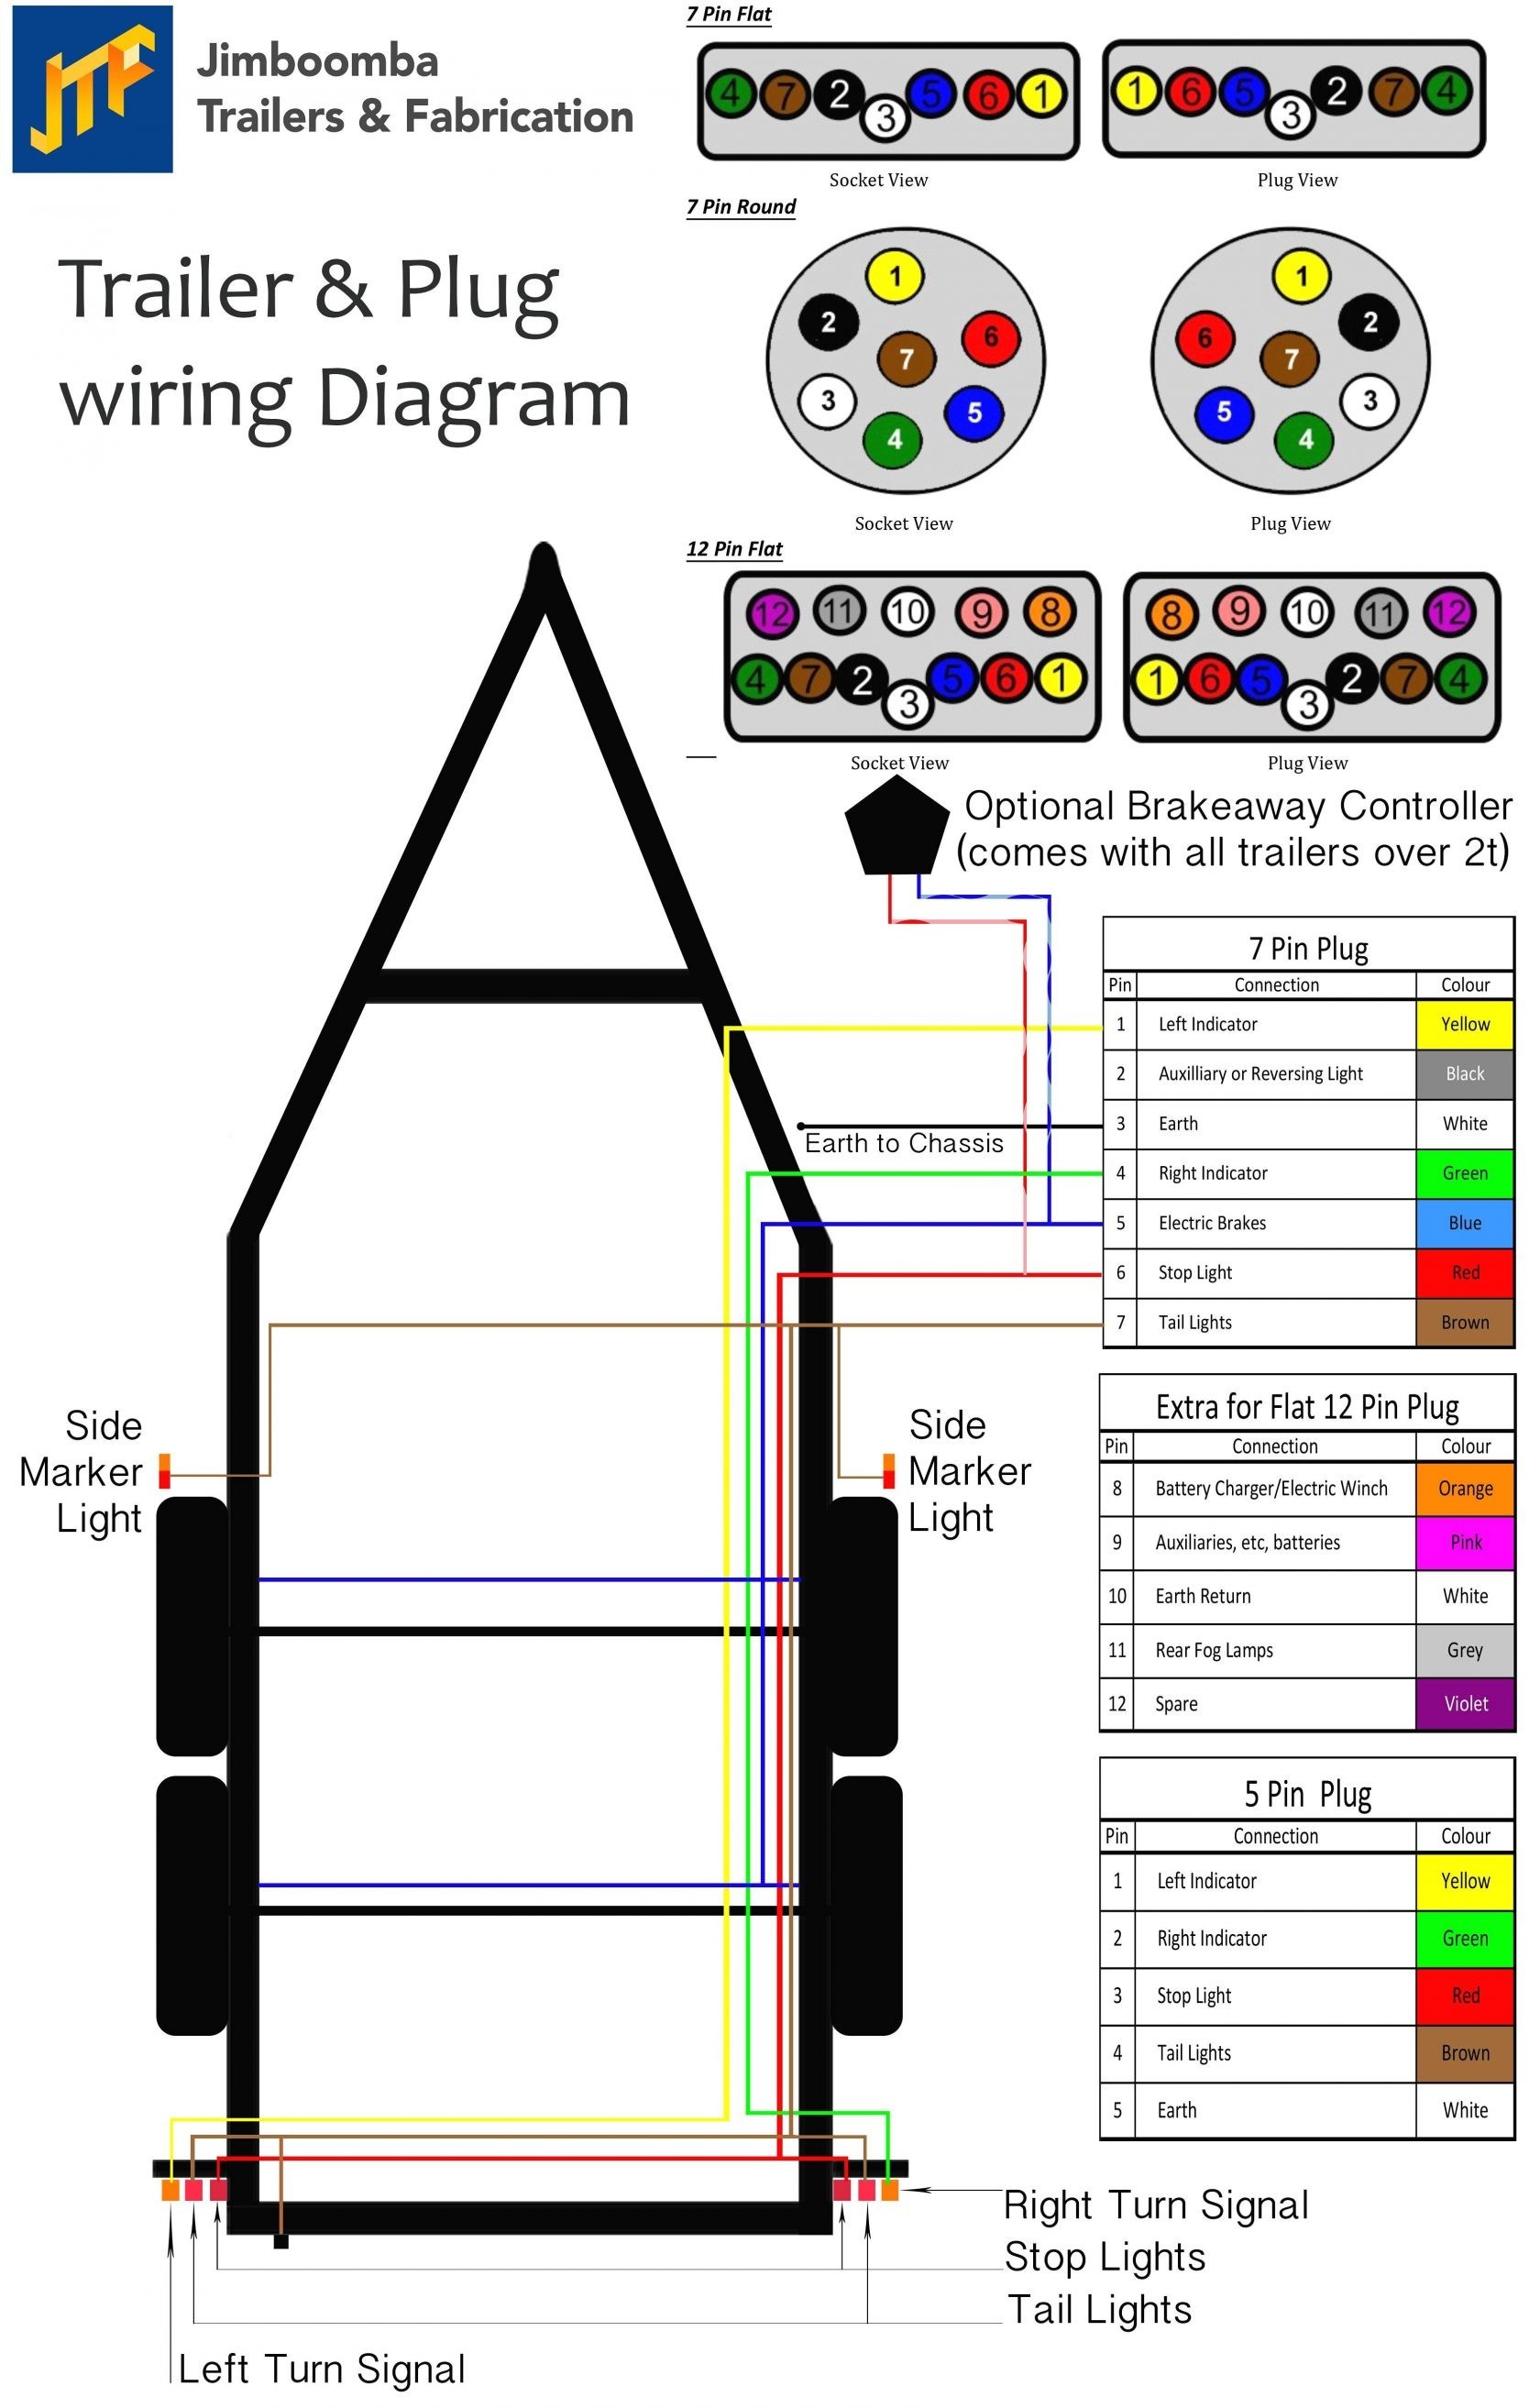 Magnificent Instruction Ethernet Cable Wiring Diagram Ideas